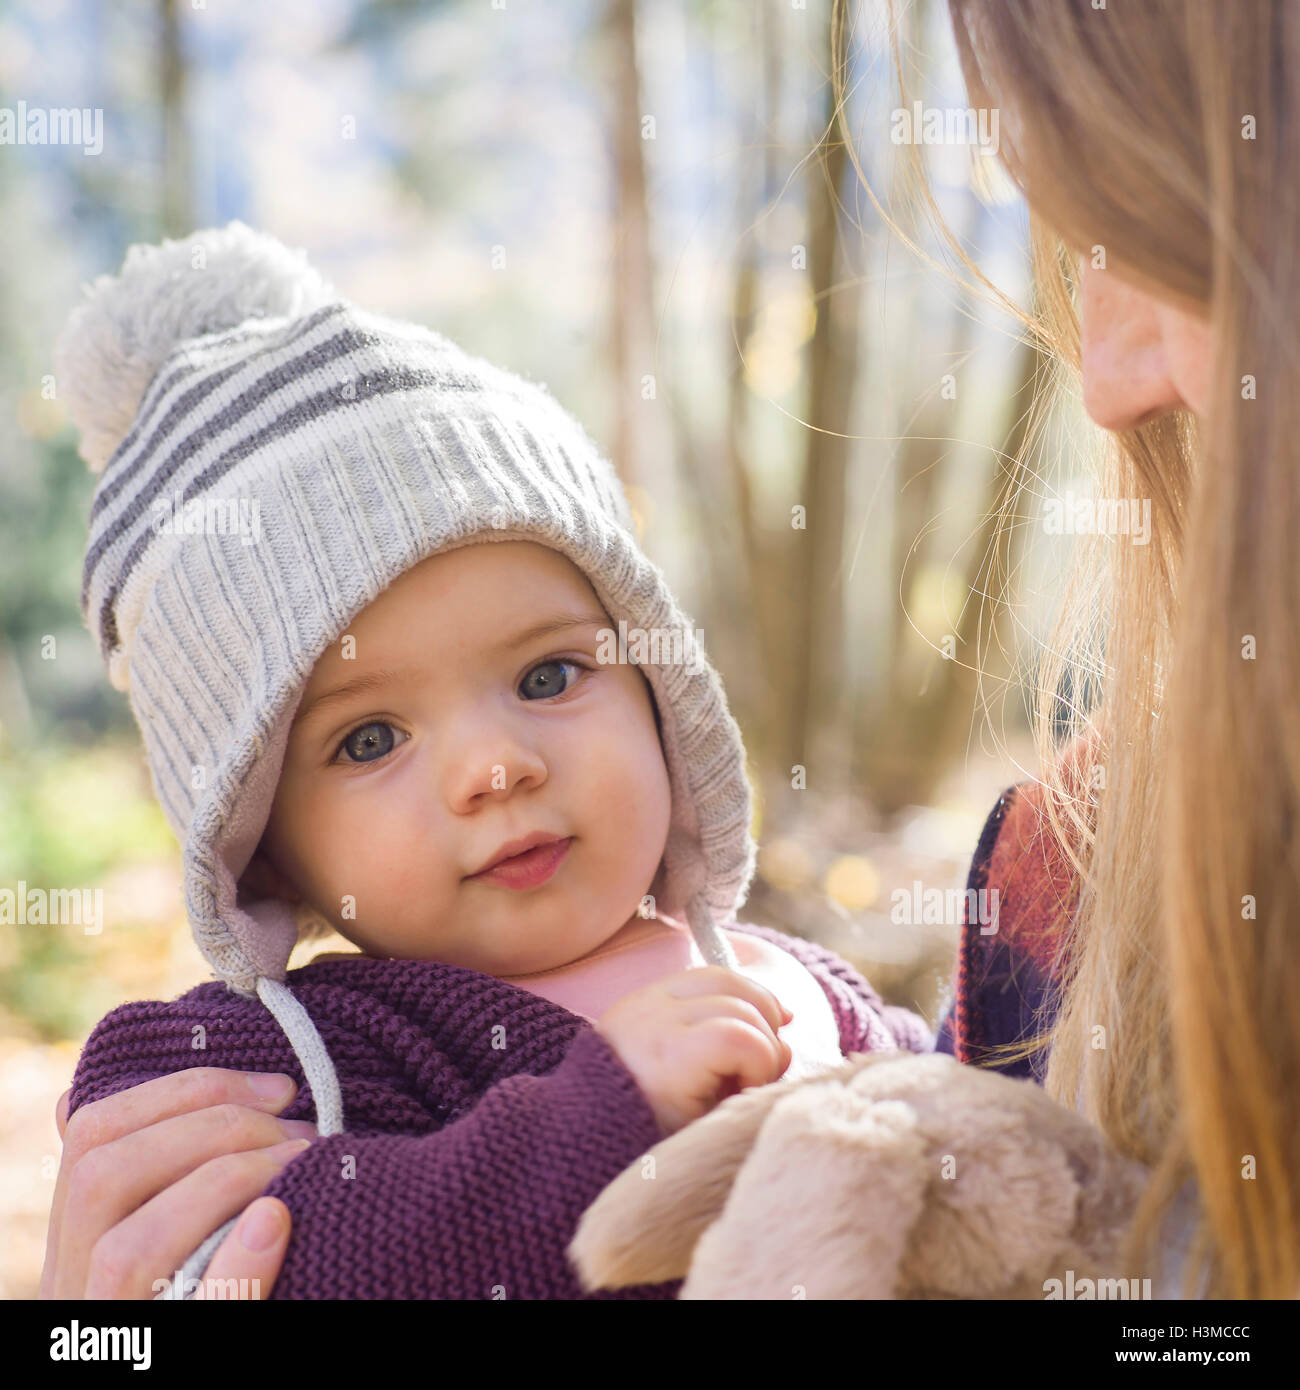 Portrait of baby girl wearing knit hat looking at camera Stock Photo